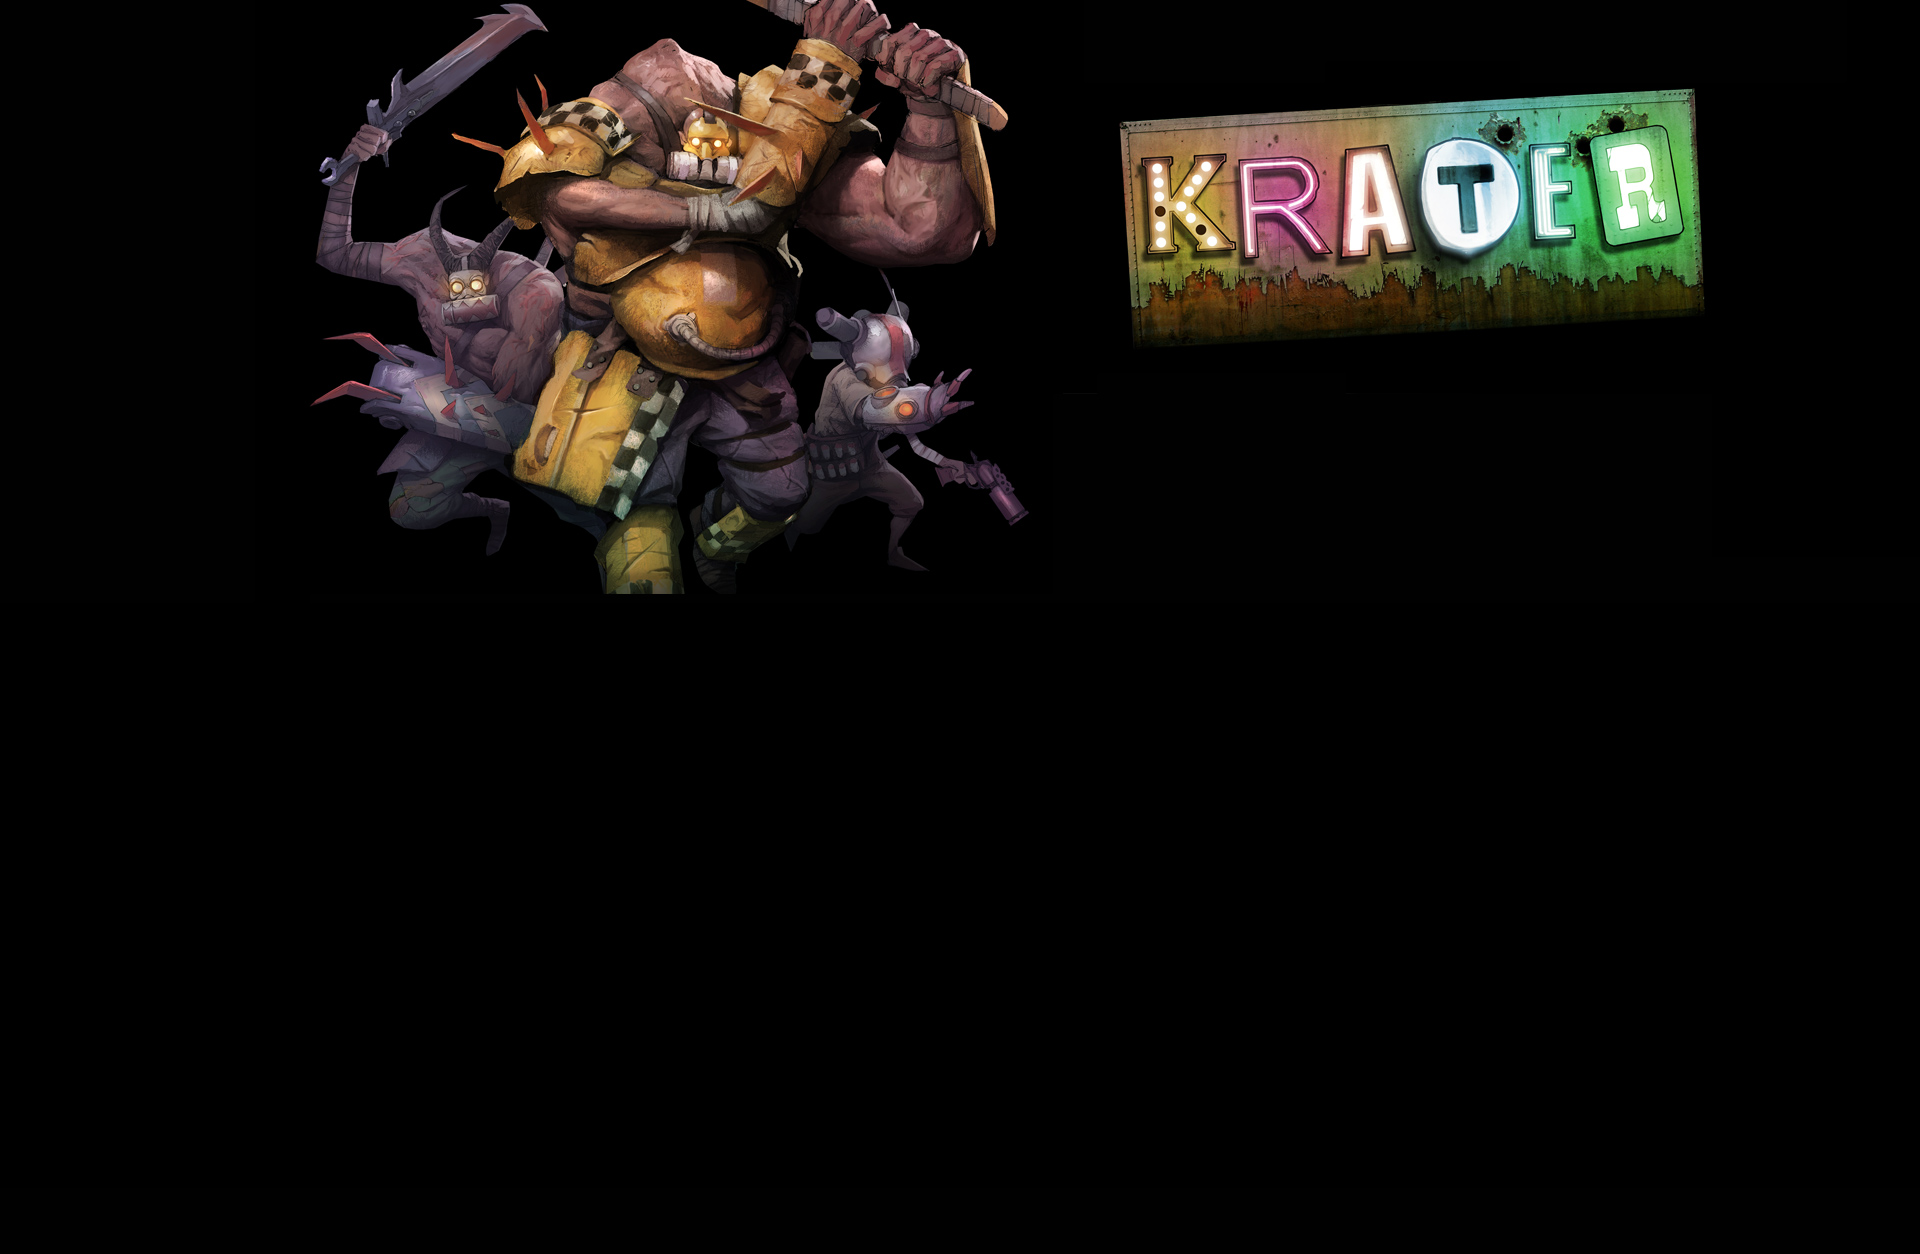 Krater